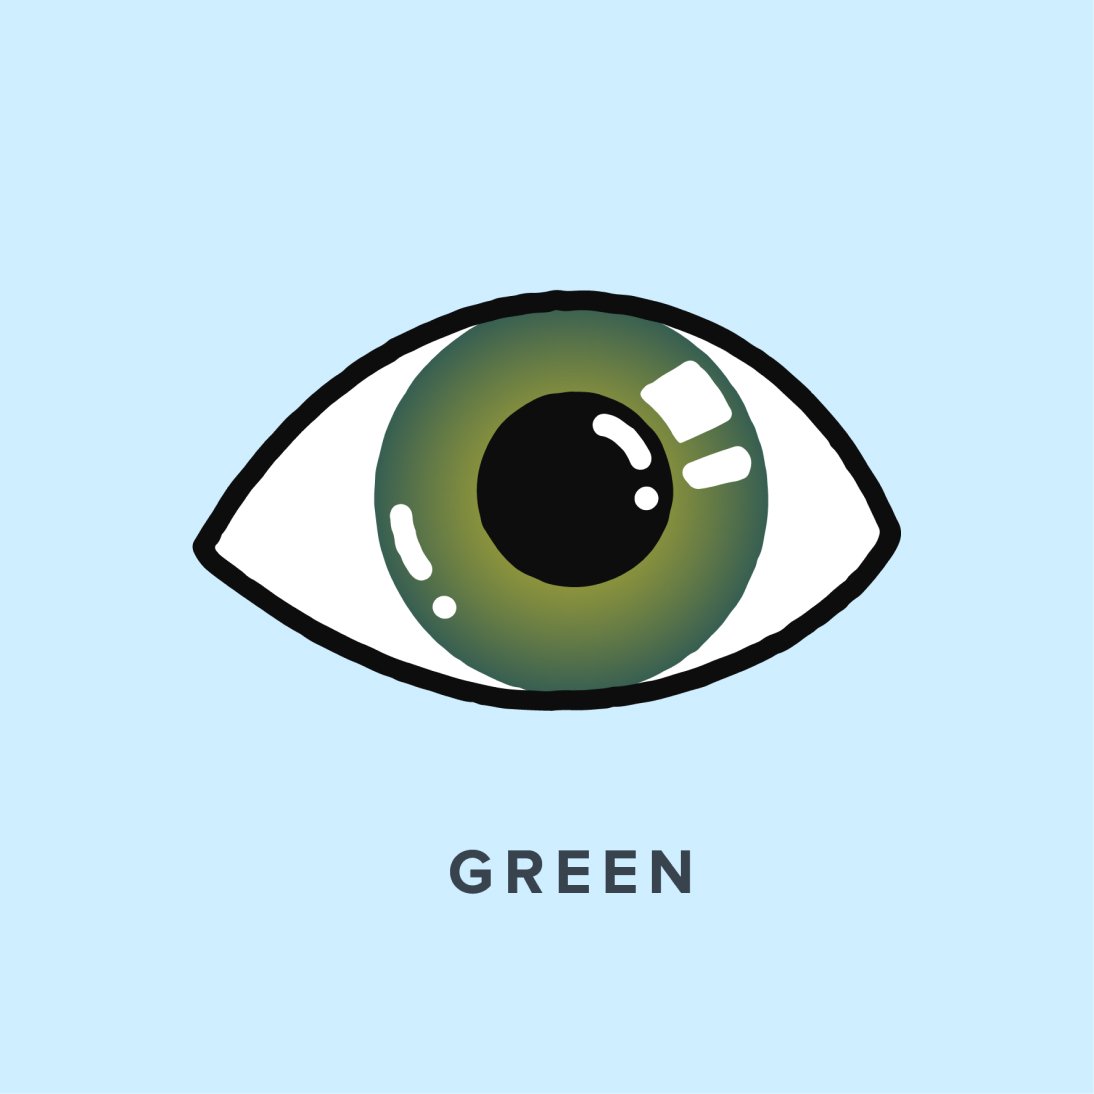 Illustration of a green-colored eye